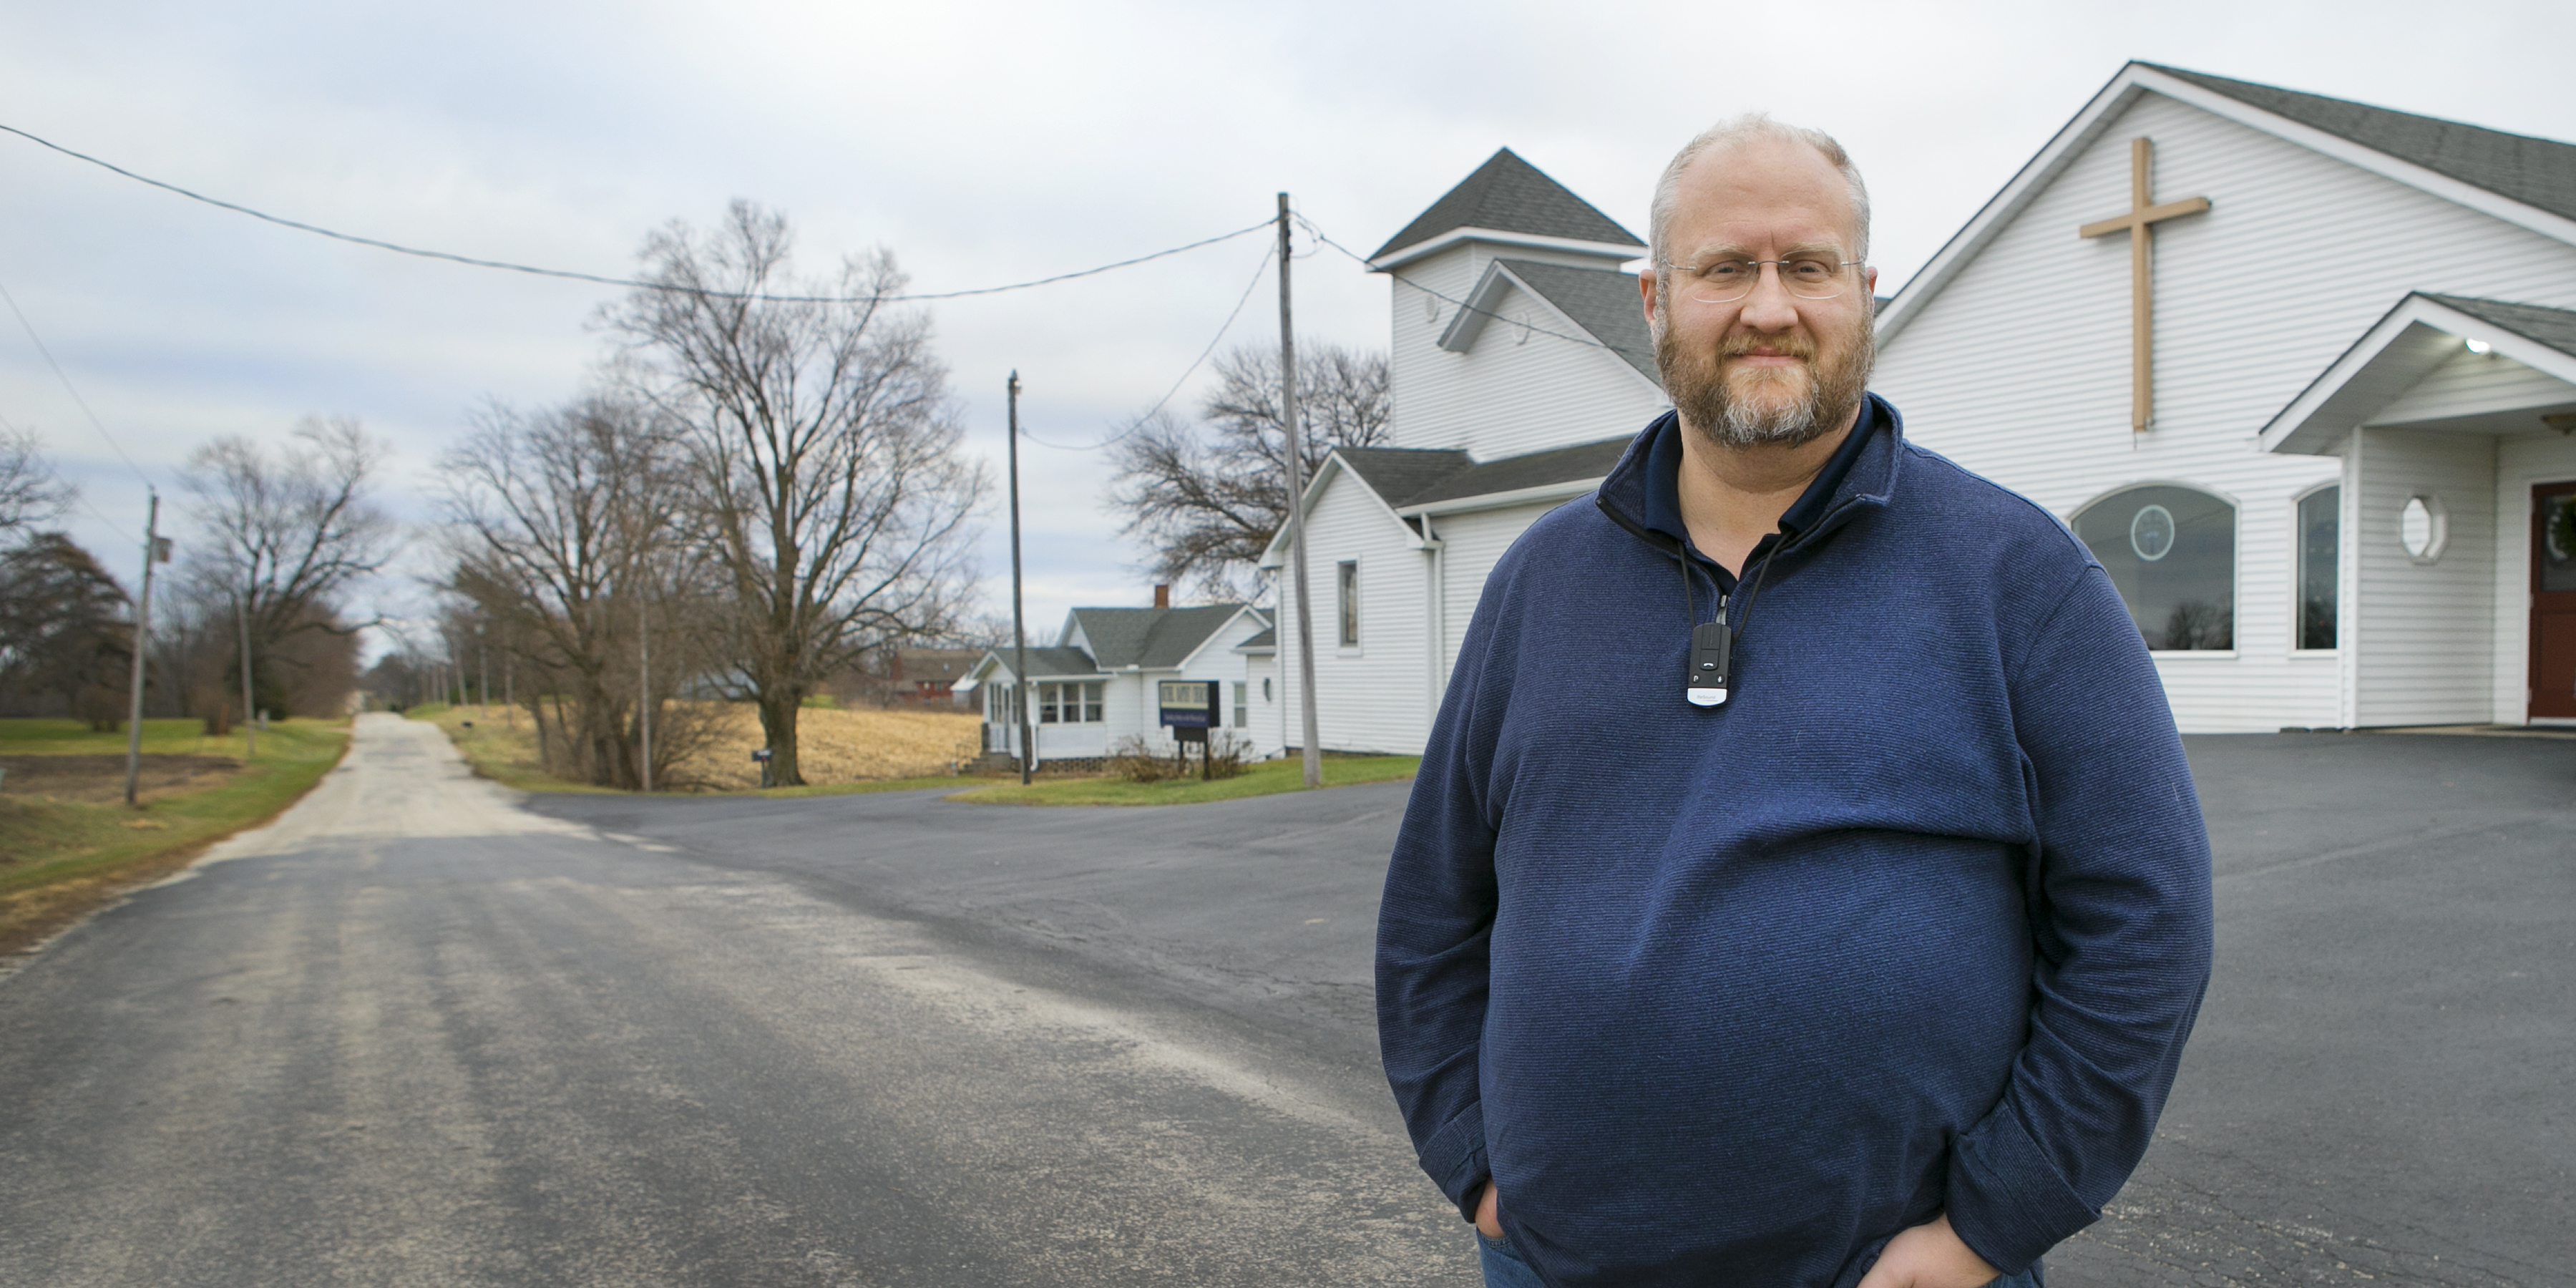 Photo of Lee Williams, minister of Bethel Baptist Church in Port Byron, Illinois, standing in the road outside his church.